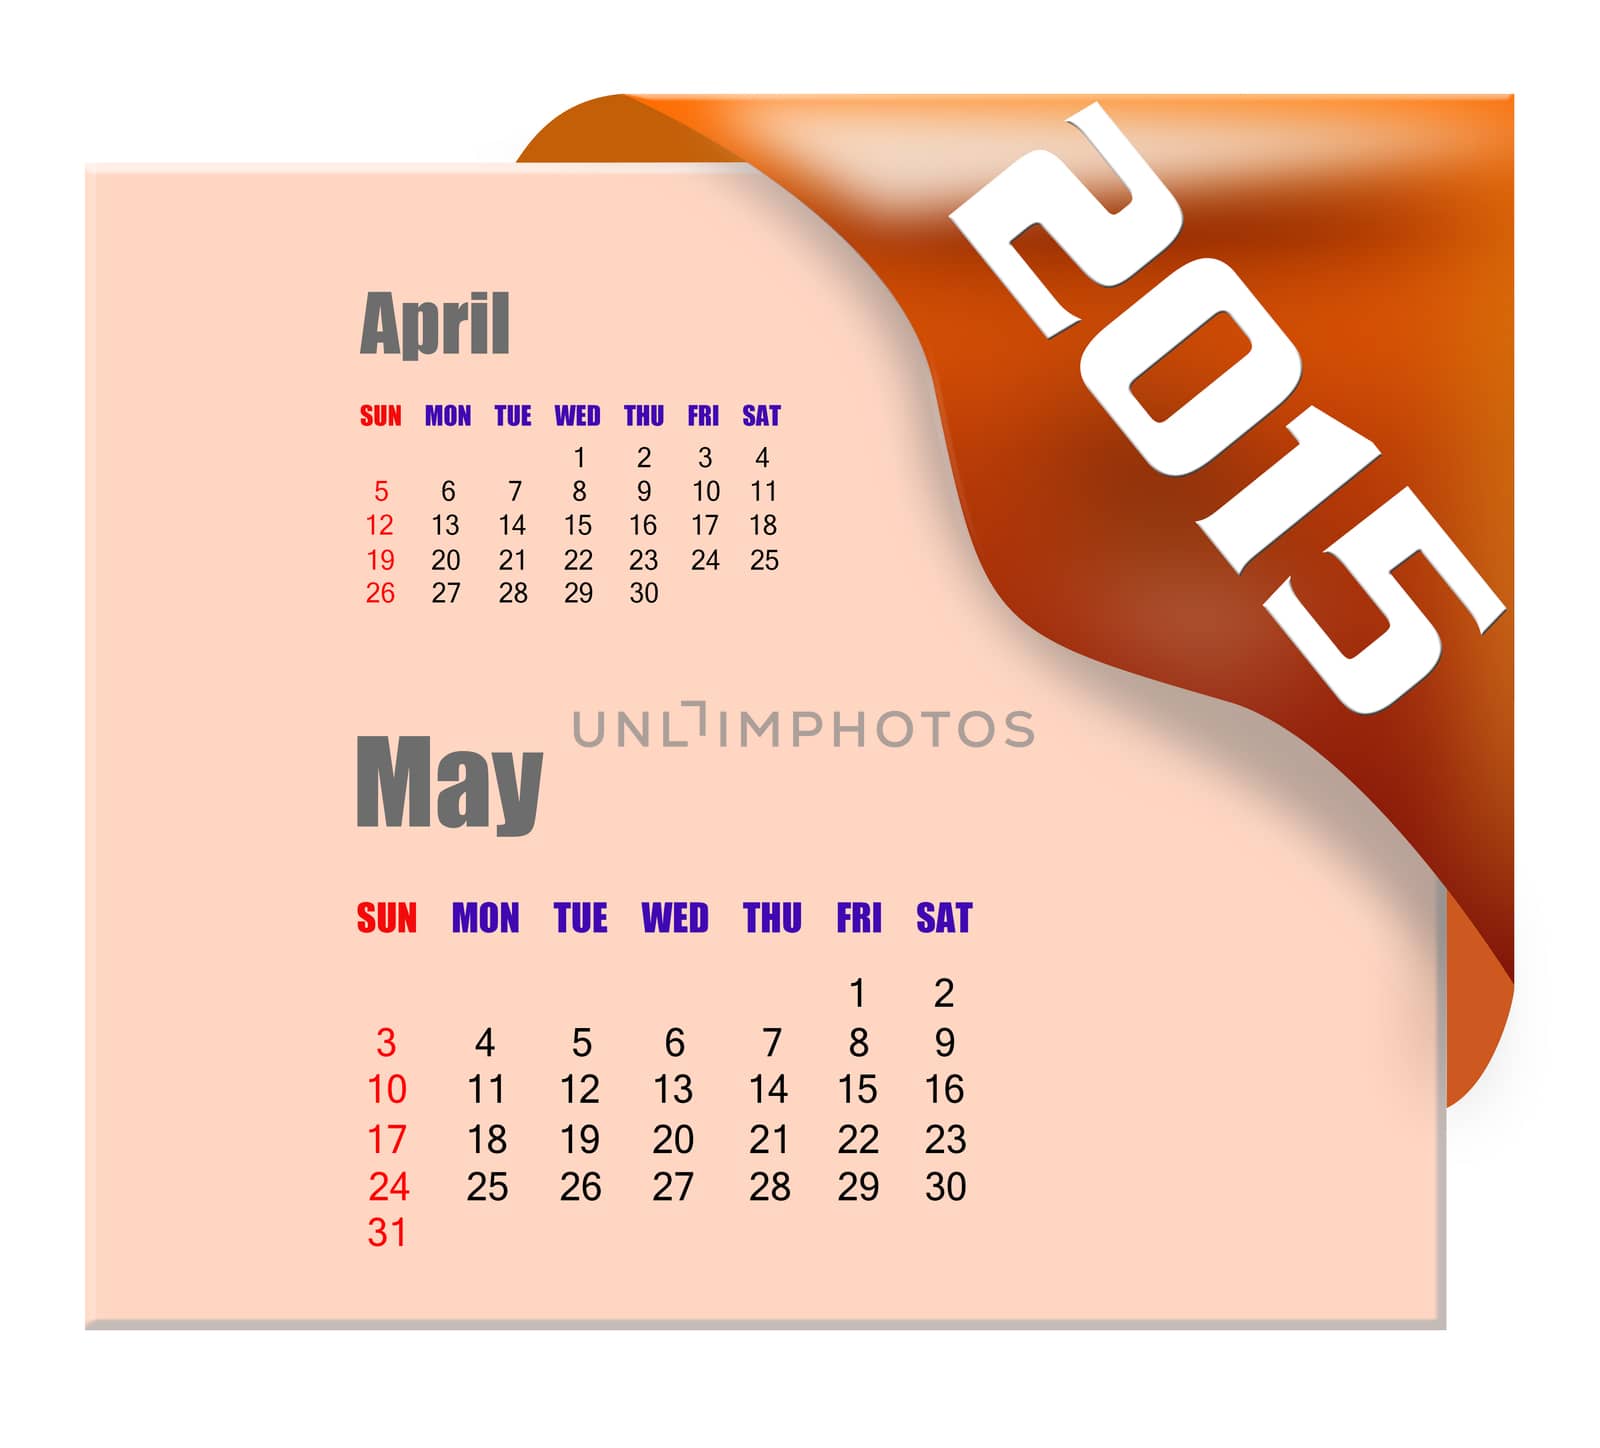 May 2015 calendar with past month series